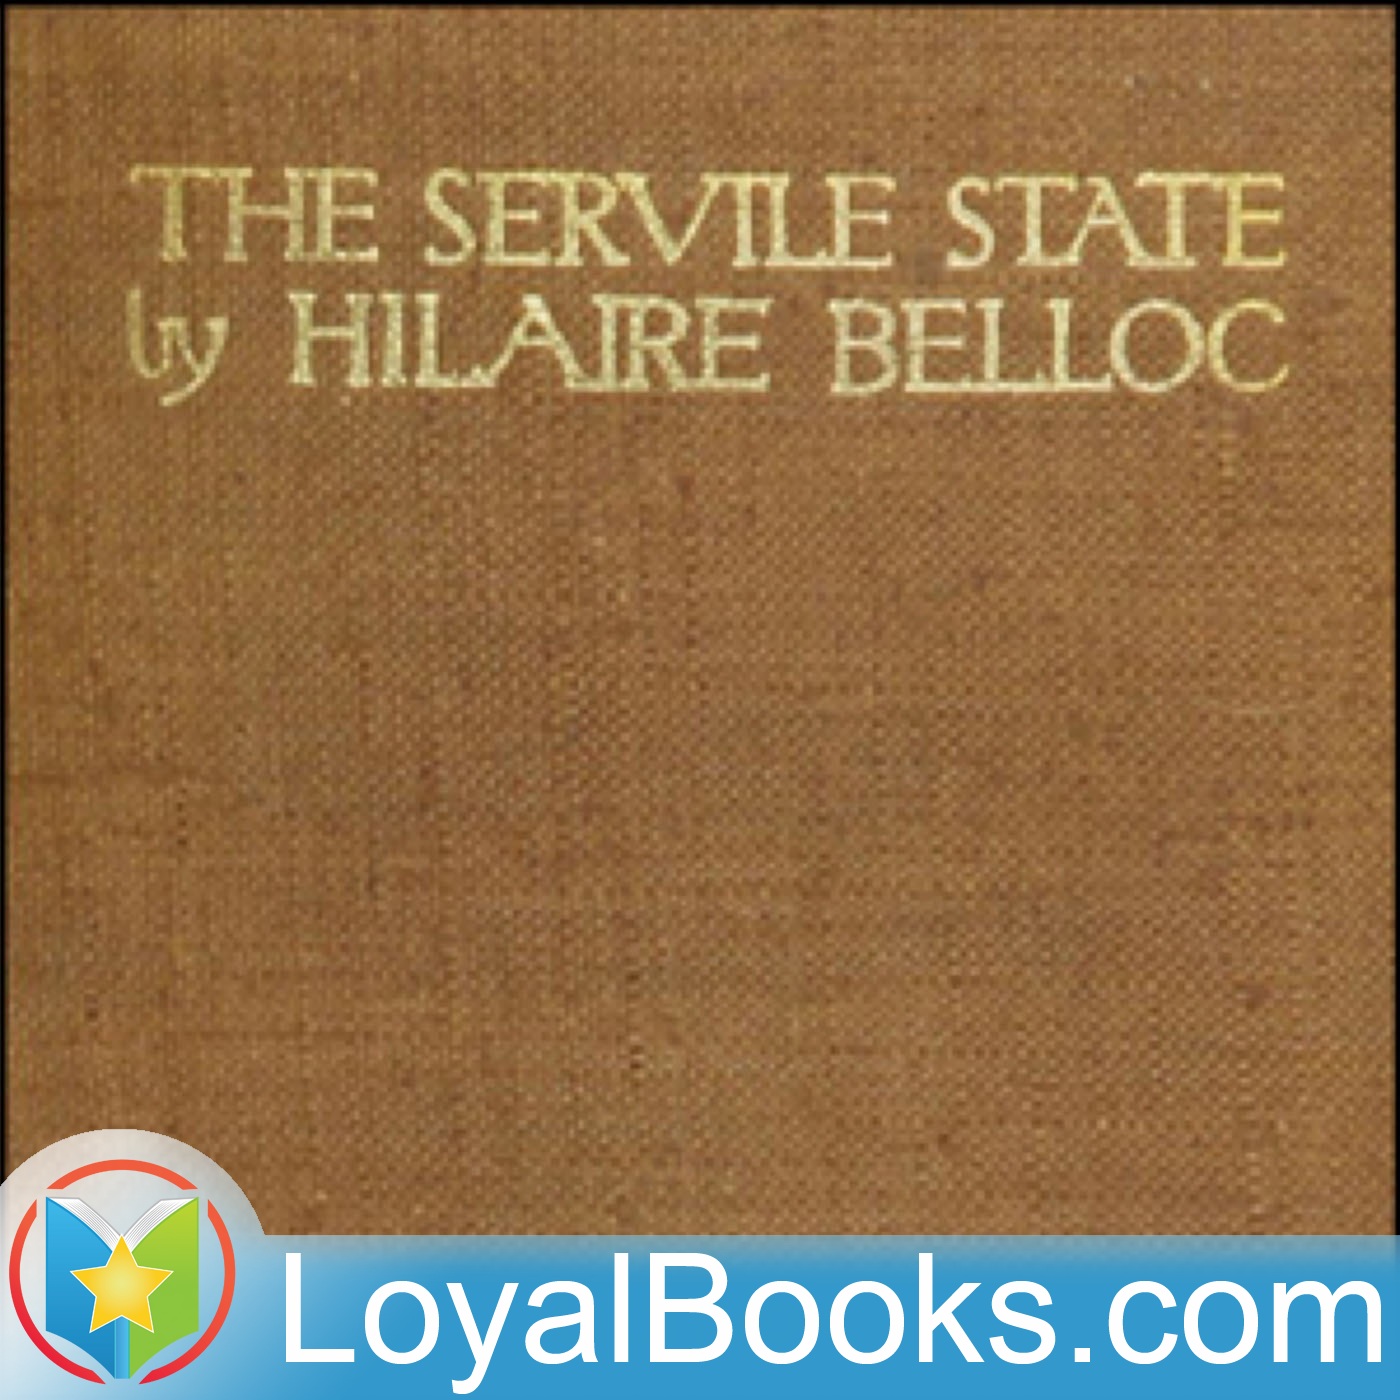 The Servile State by Hilaire Belloc